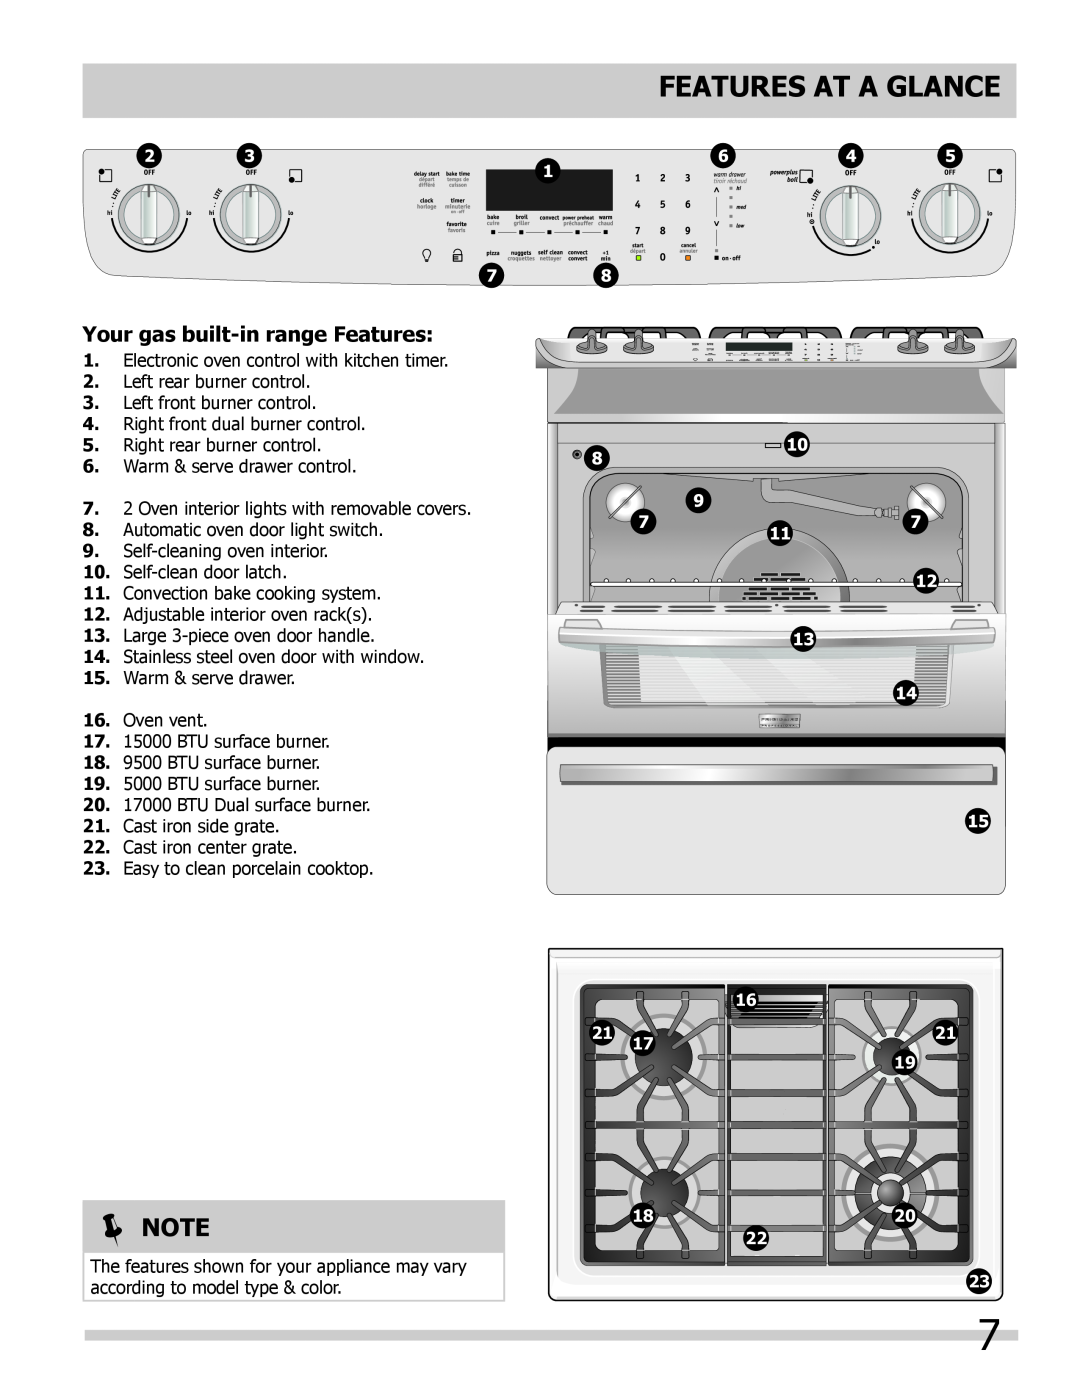 Frigidaire 318205852 manual Features At A Glance, Your gas built-in range Features, 09-025-F,  Note 